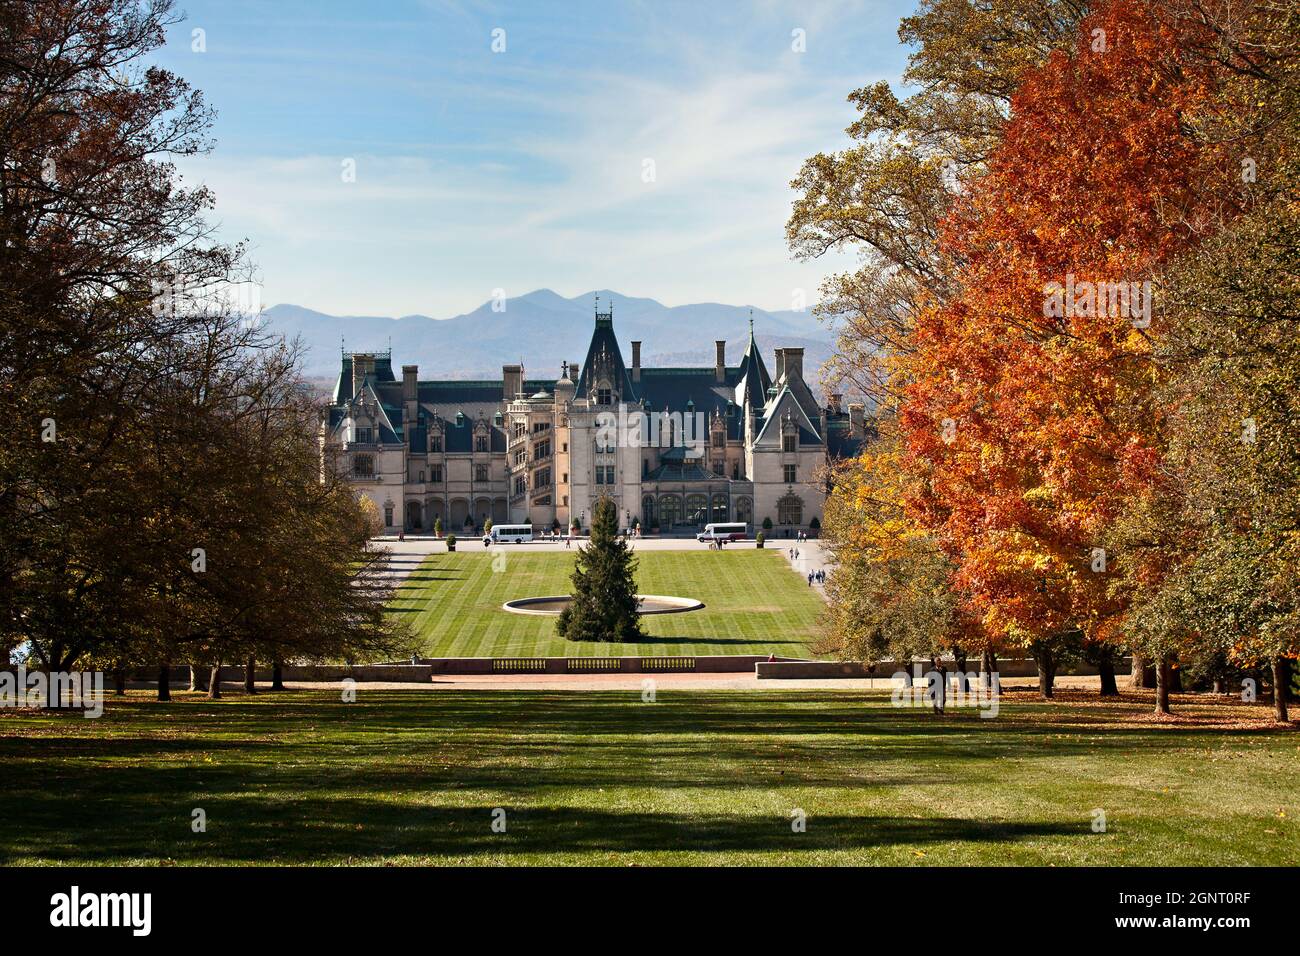 The Biltmore Estate, privately owned by the Vanderbilt family during autumn in Asheville, North Carolina. The house is the largest private home in America with over 250 rooms. Stock Photo